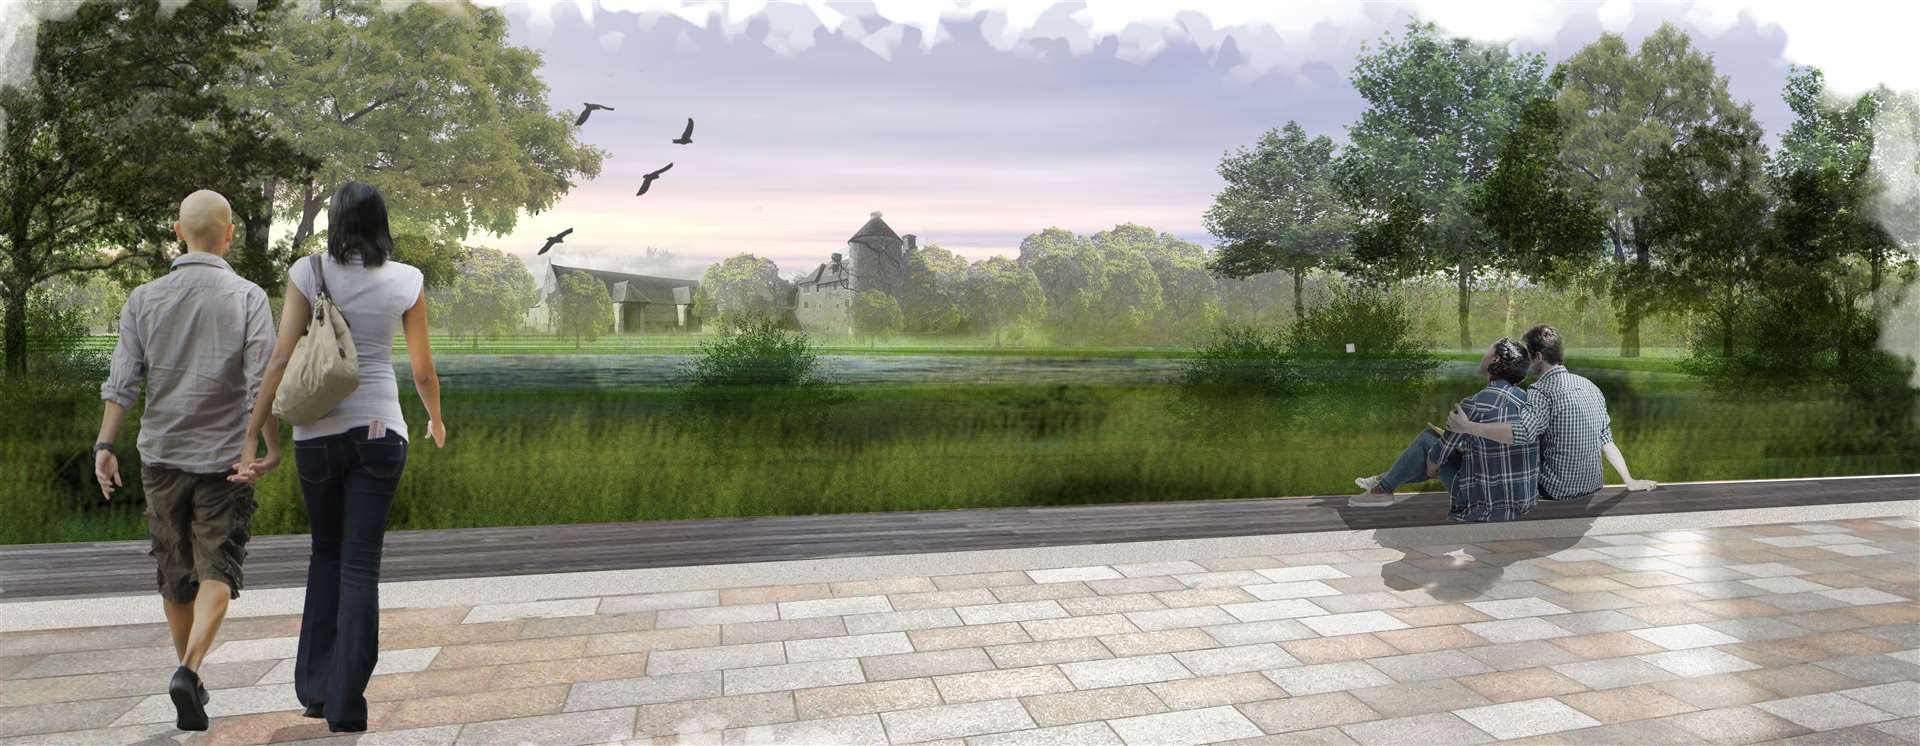 Public walkways and open spaces are part of the plans for the new park. Photo: Otterpool Park/Pillory Barn